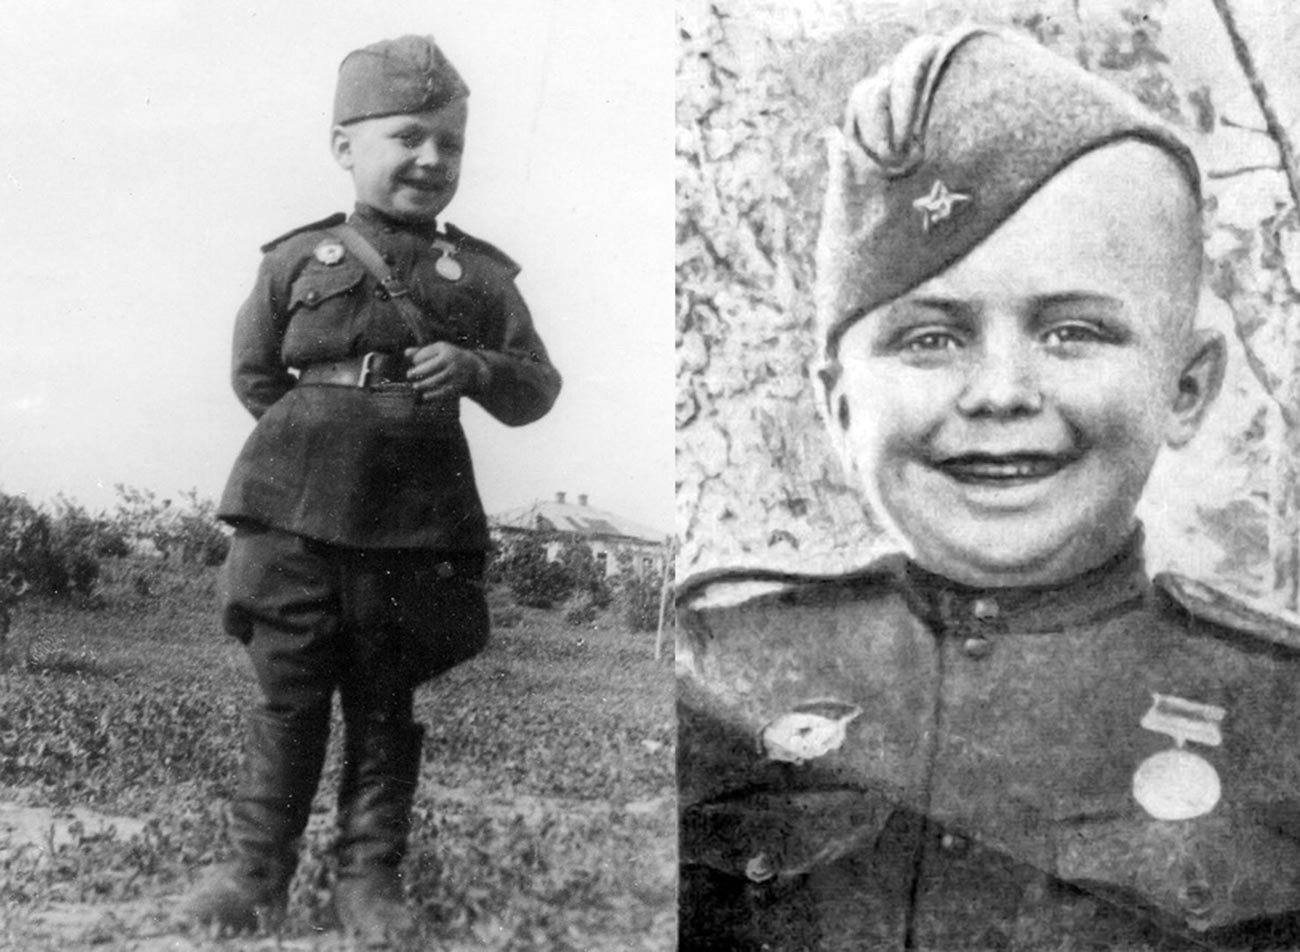 True story about a boy who's entire family is slaughtered by the Nazis, little kid manages to escape into the woods. Is found starving days later by Russian soldiers, gets treated well, becomes a beloved part of the corps, a Red Army Officer at age 12, serves in battle by carrying ammunition, uncovers Nazi spy campaigns, dances and sings cute little songs to his fellow soldiers to improve morale, gets blown up, saves a major general who later adopts him into his family. u/Monkee-D